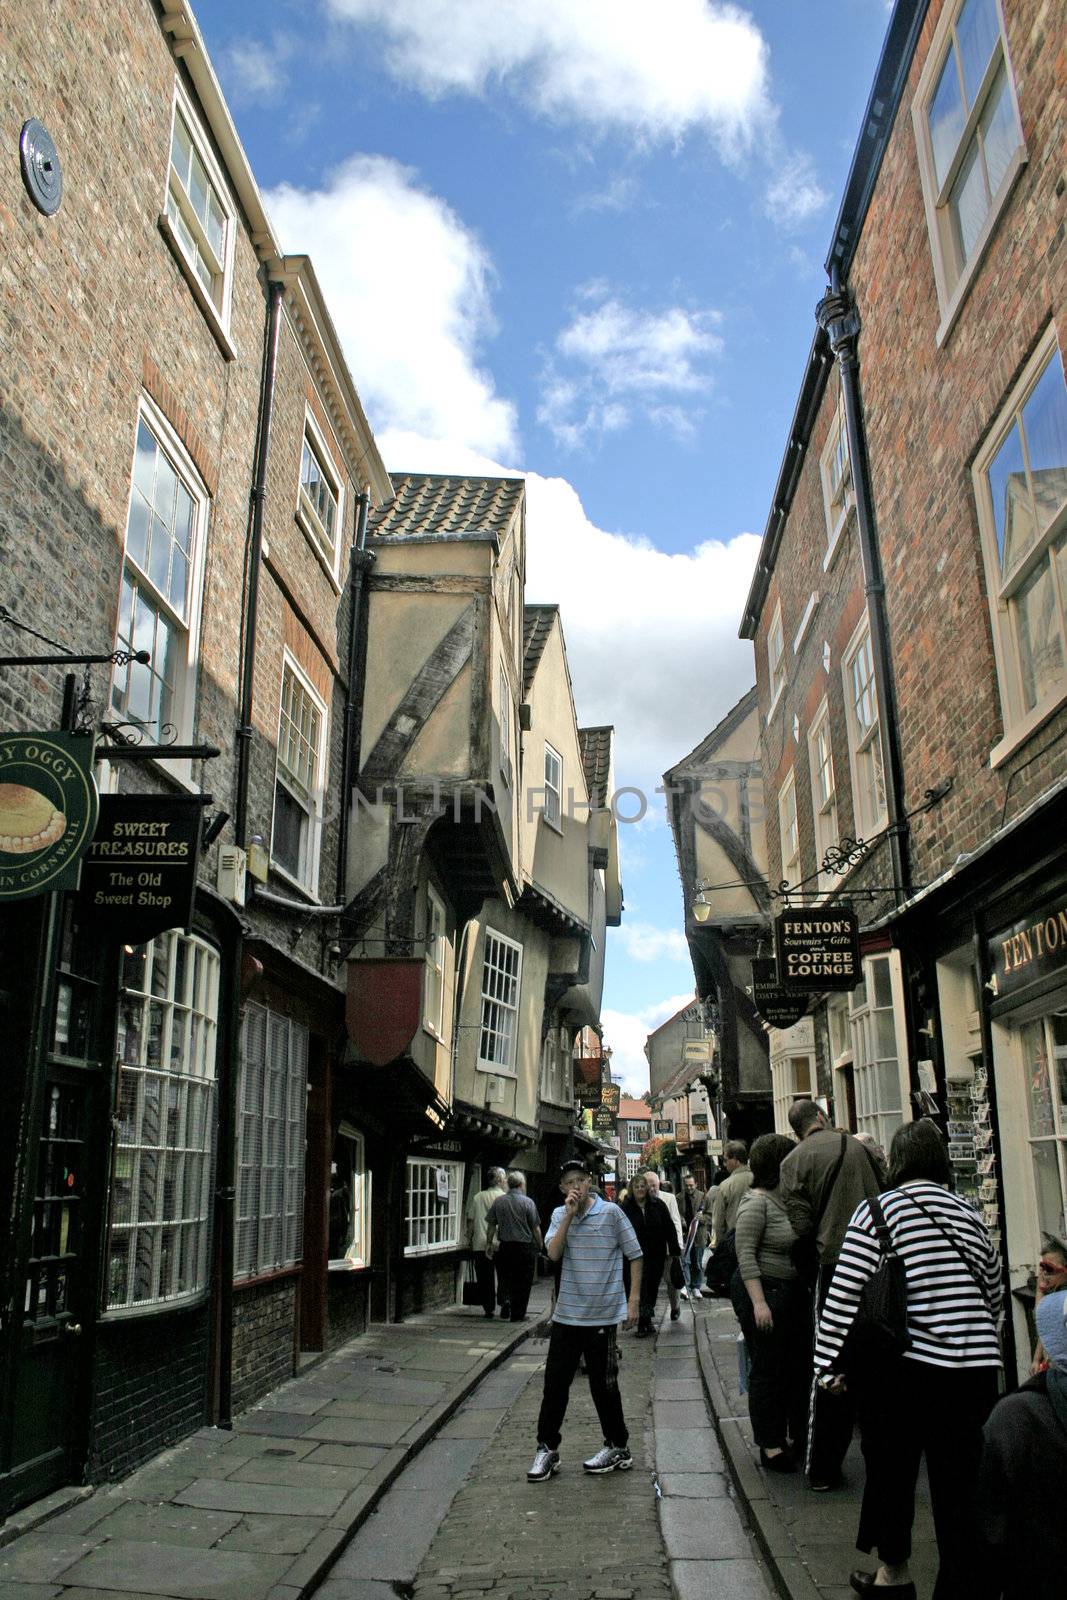 Tourists in the Shables in York UK by green308